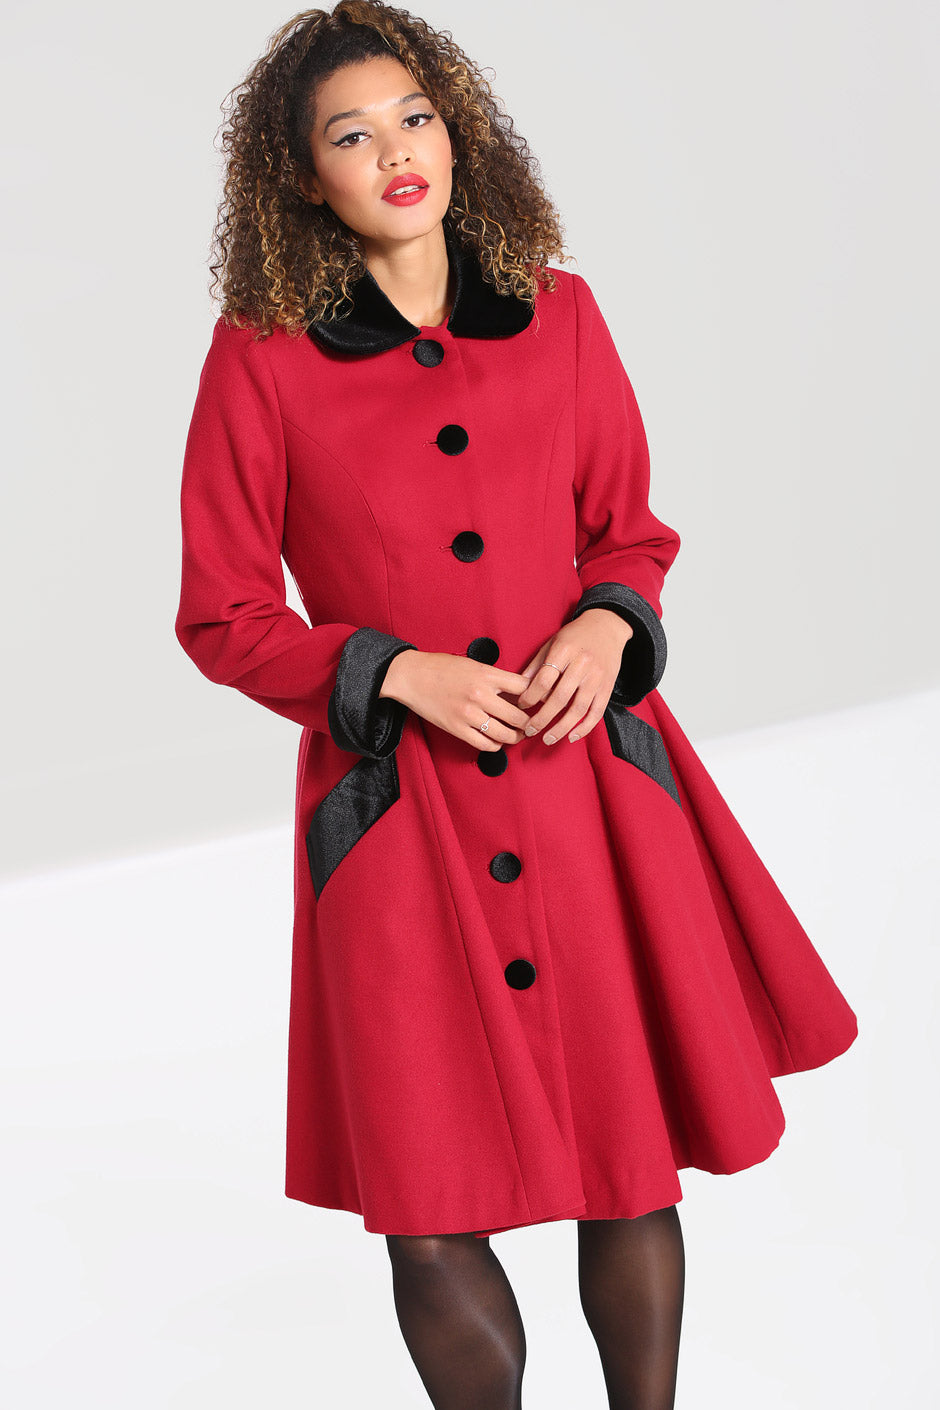 Glamorous woman wearing a vintage style red and black coat 